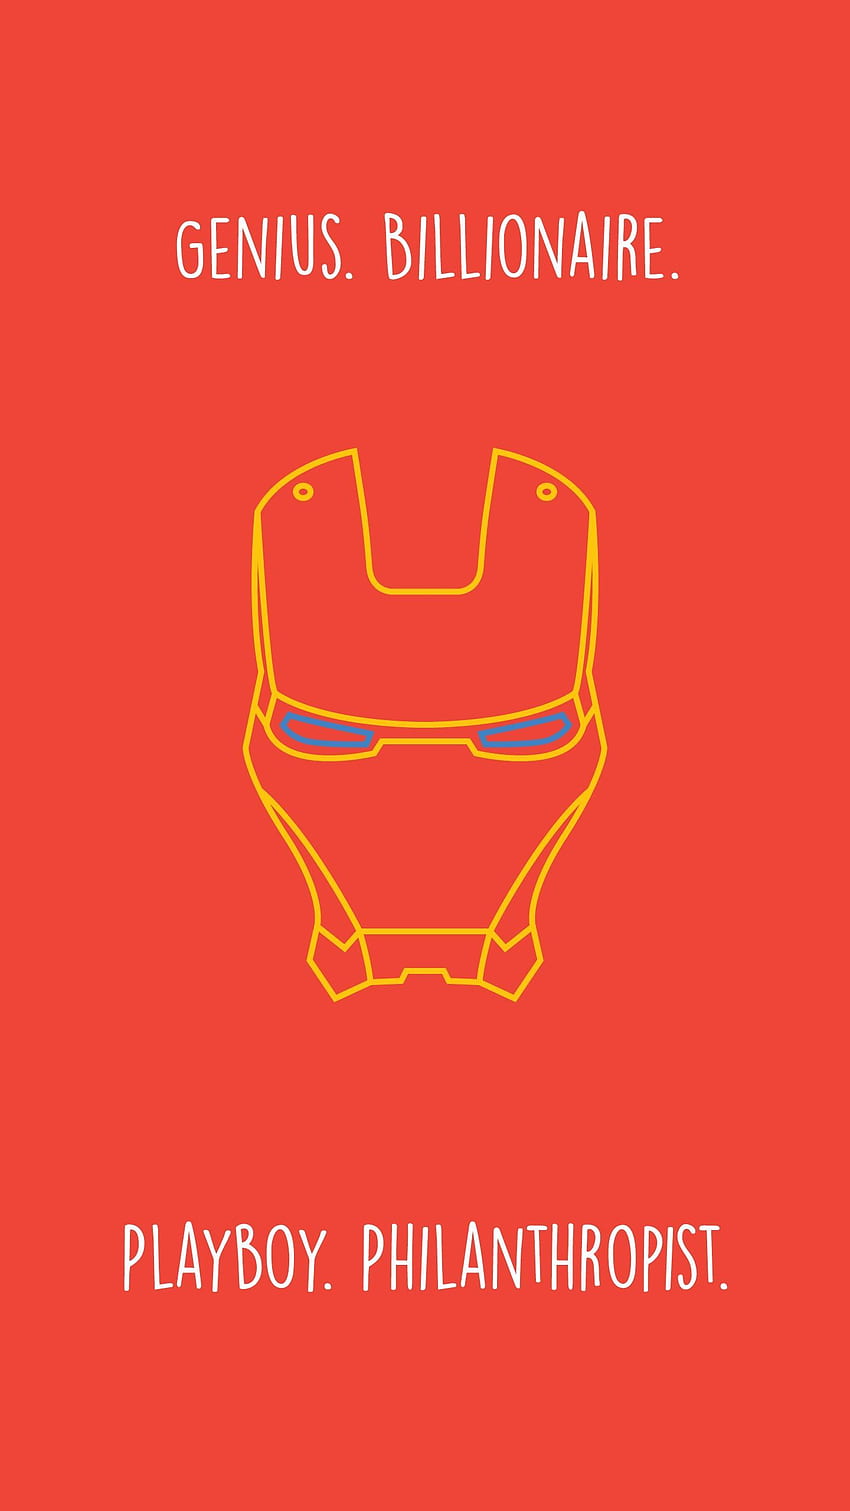 Iron Man Quote Minimal . Iron man quotes, Avengers quotes, Avengers, Marvel Quote HD phone wallpaper